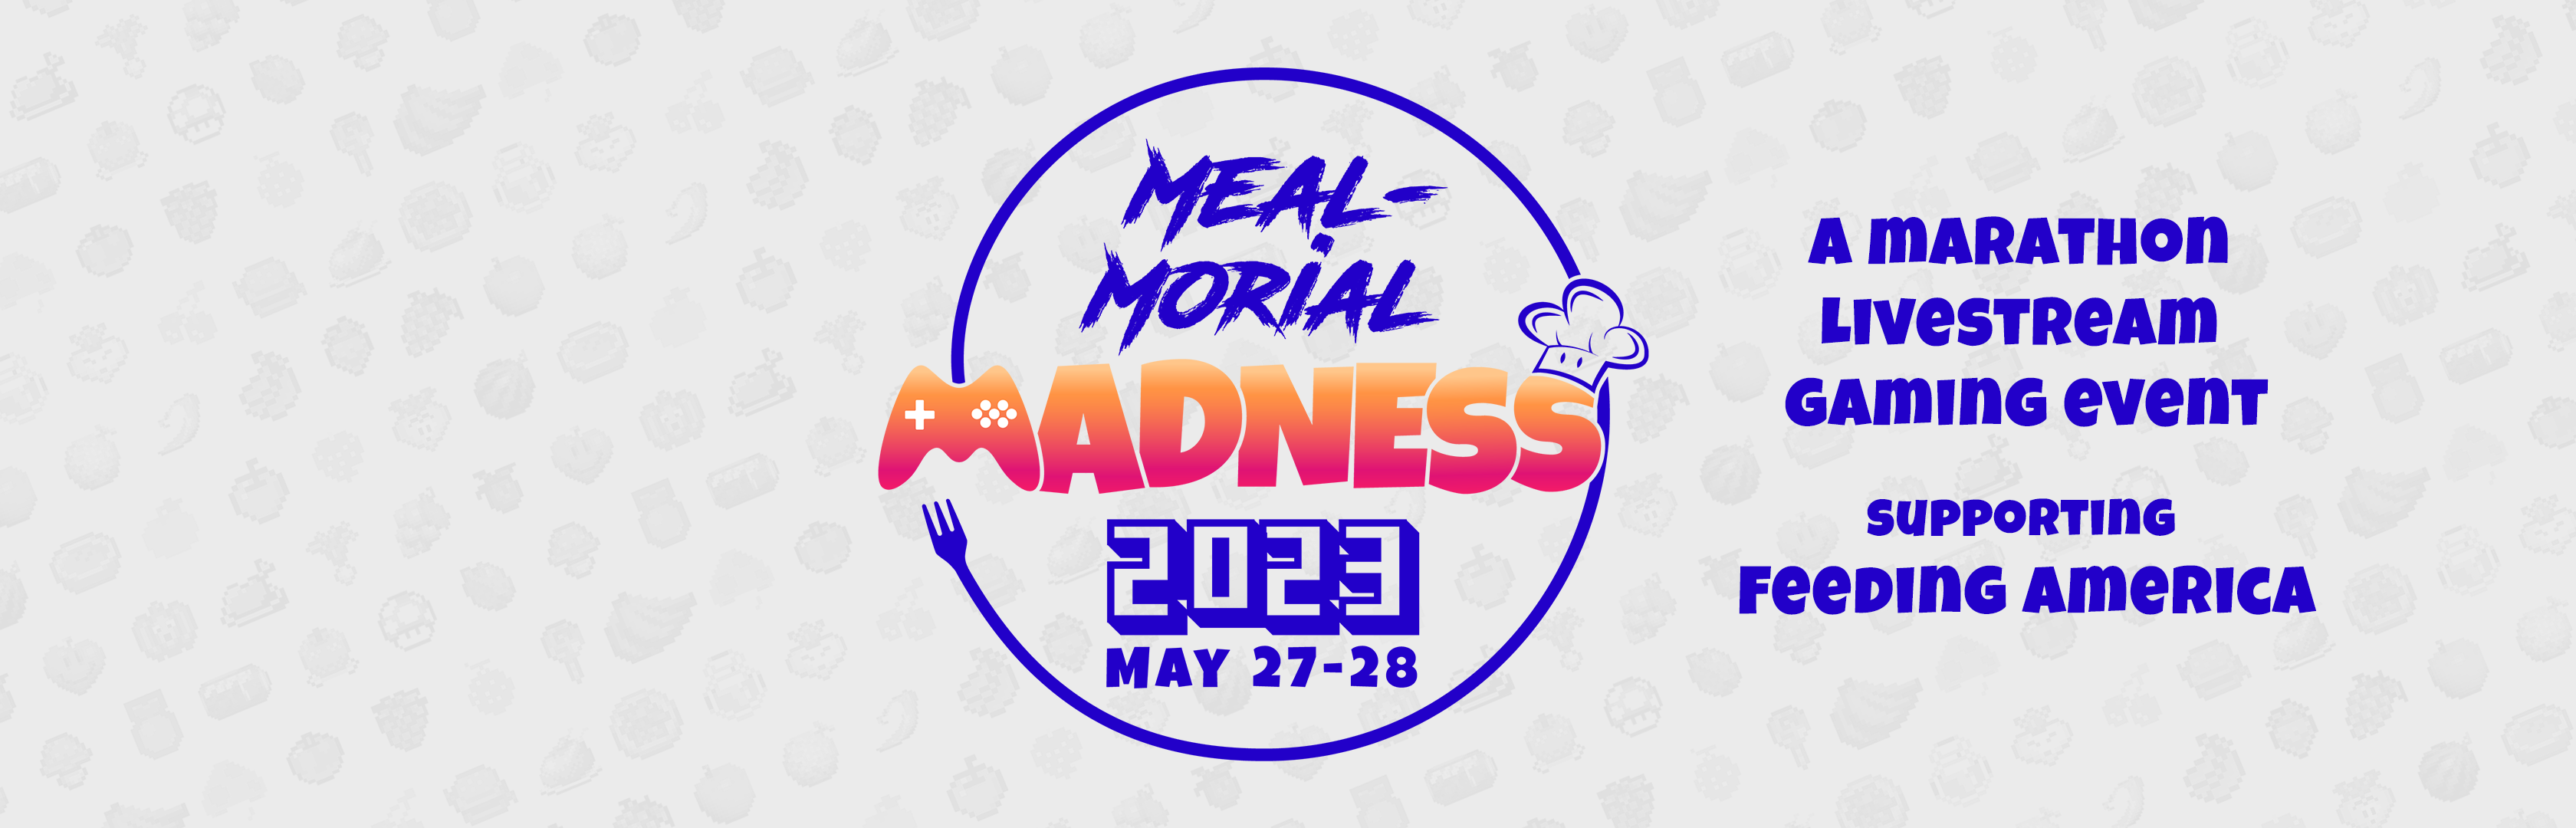 Save the Date – Meal-Morial Madness 2023